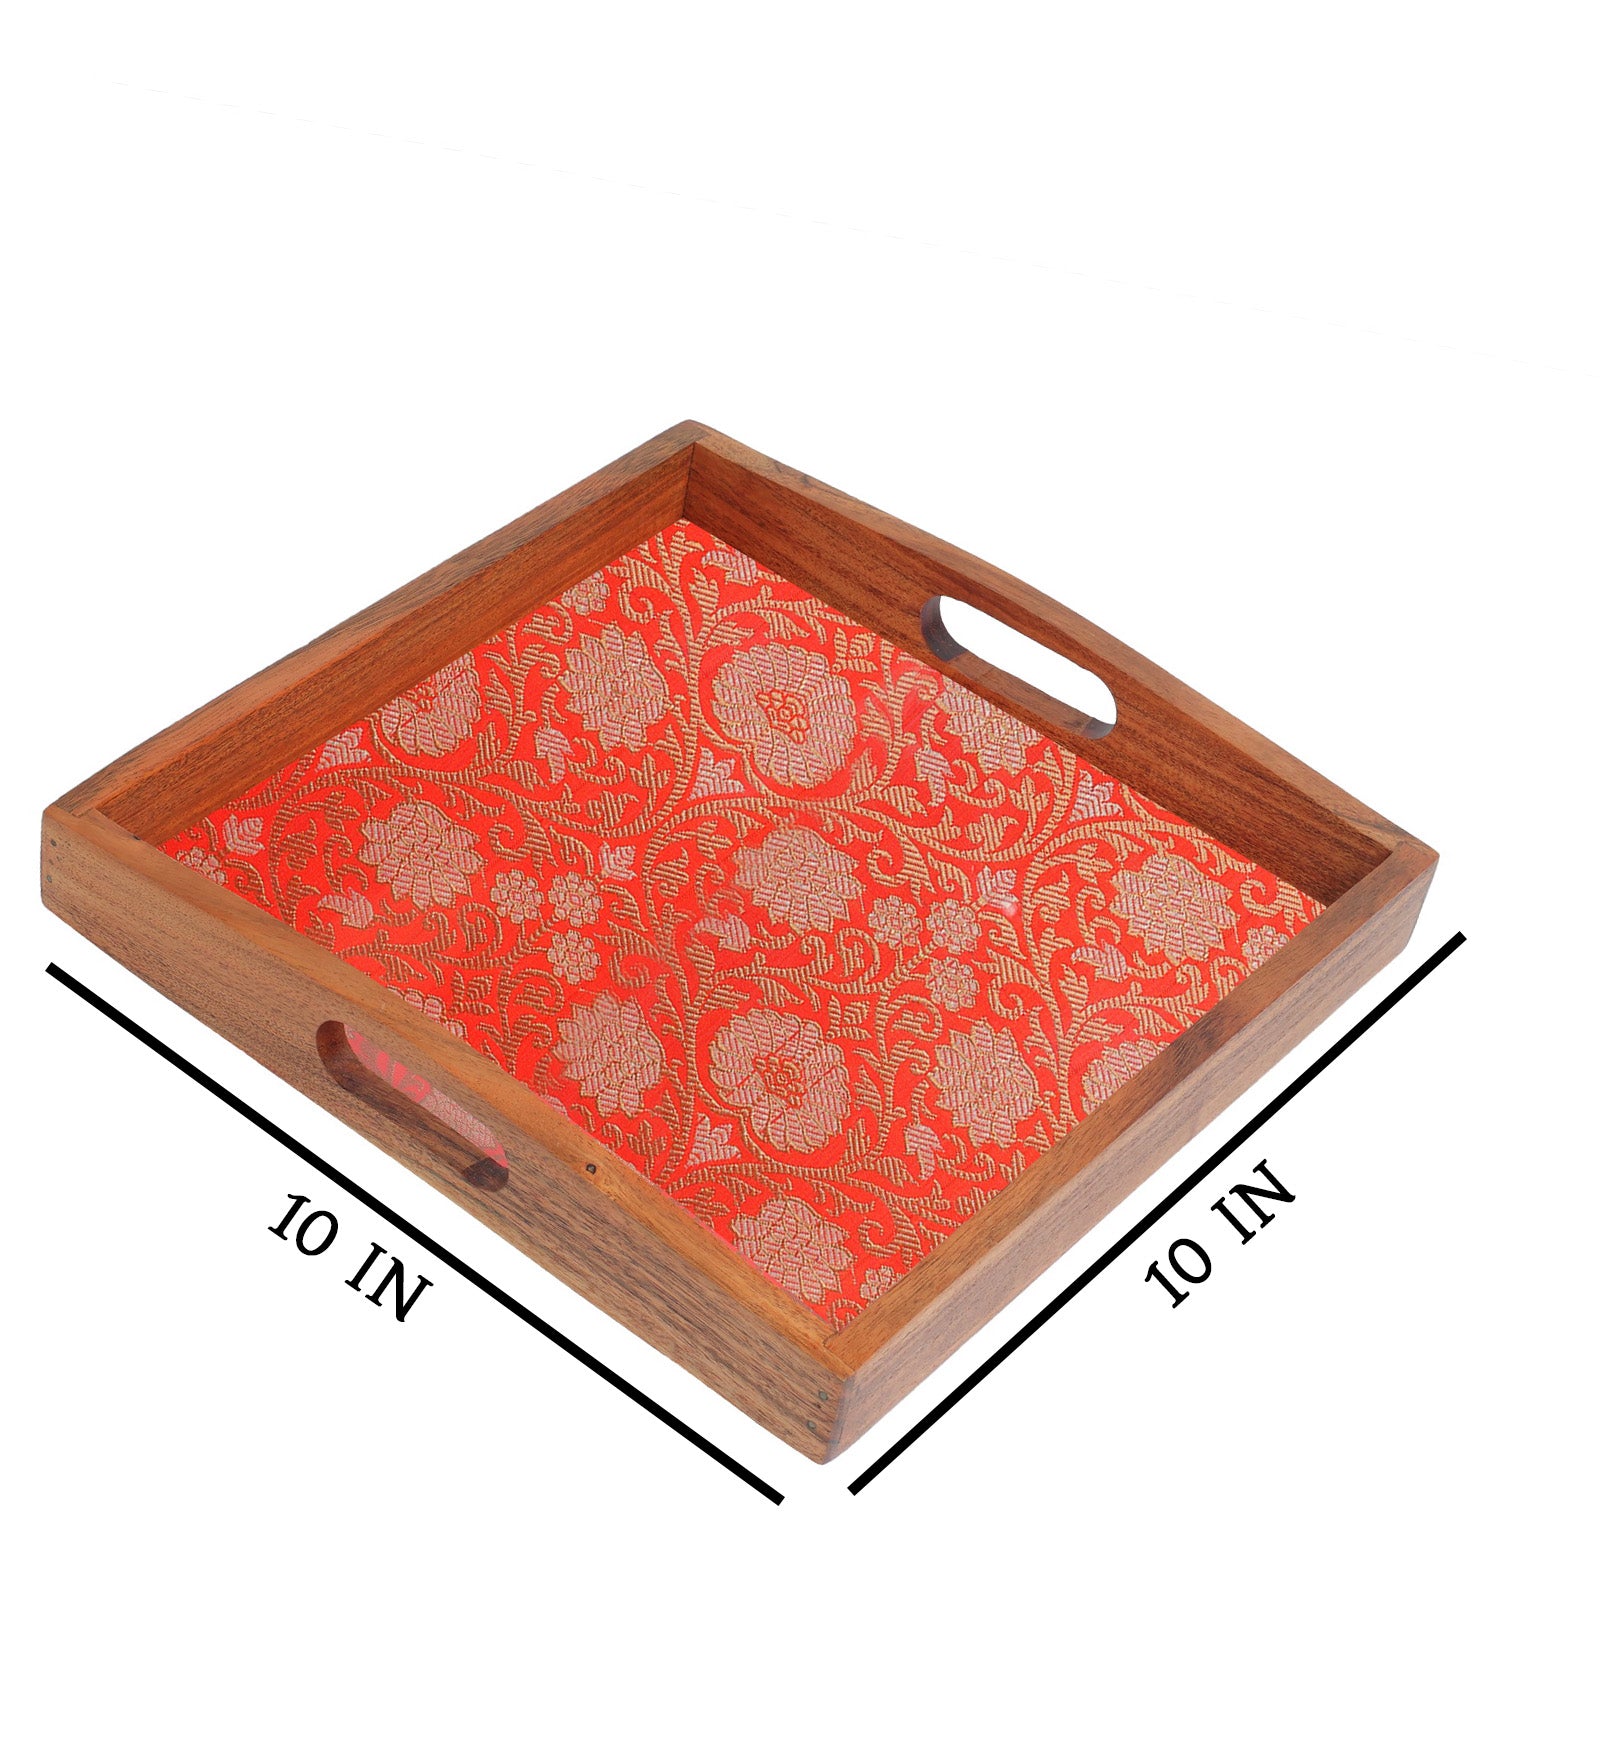 exquisite wooden serving tray 10"X 10"